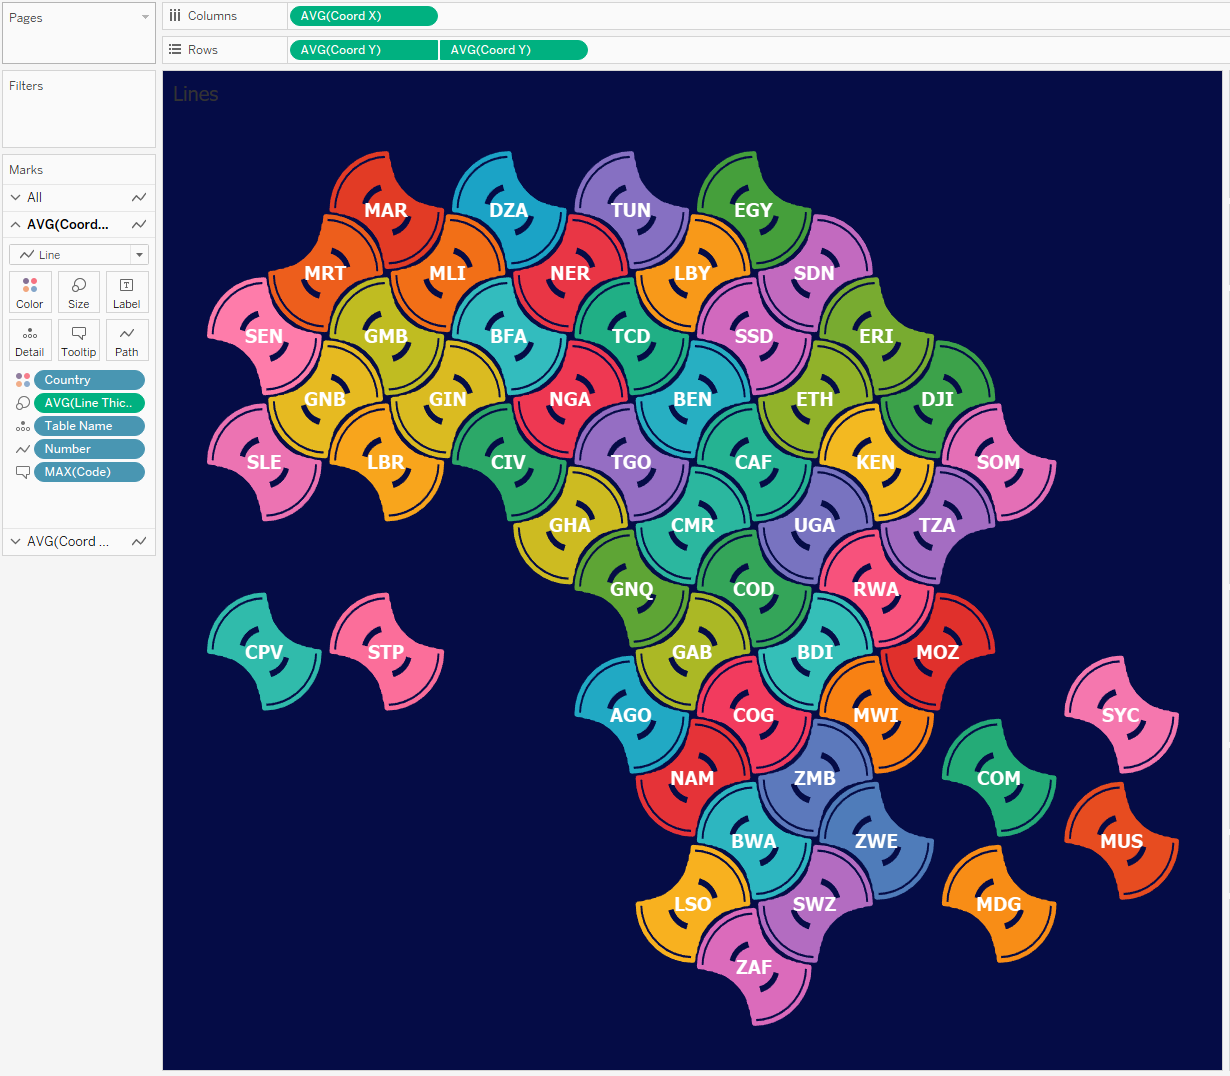 Animated Polygons In Tableau The Flerlage Twins Analytics Data Visualization And Tableau